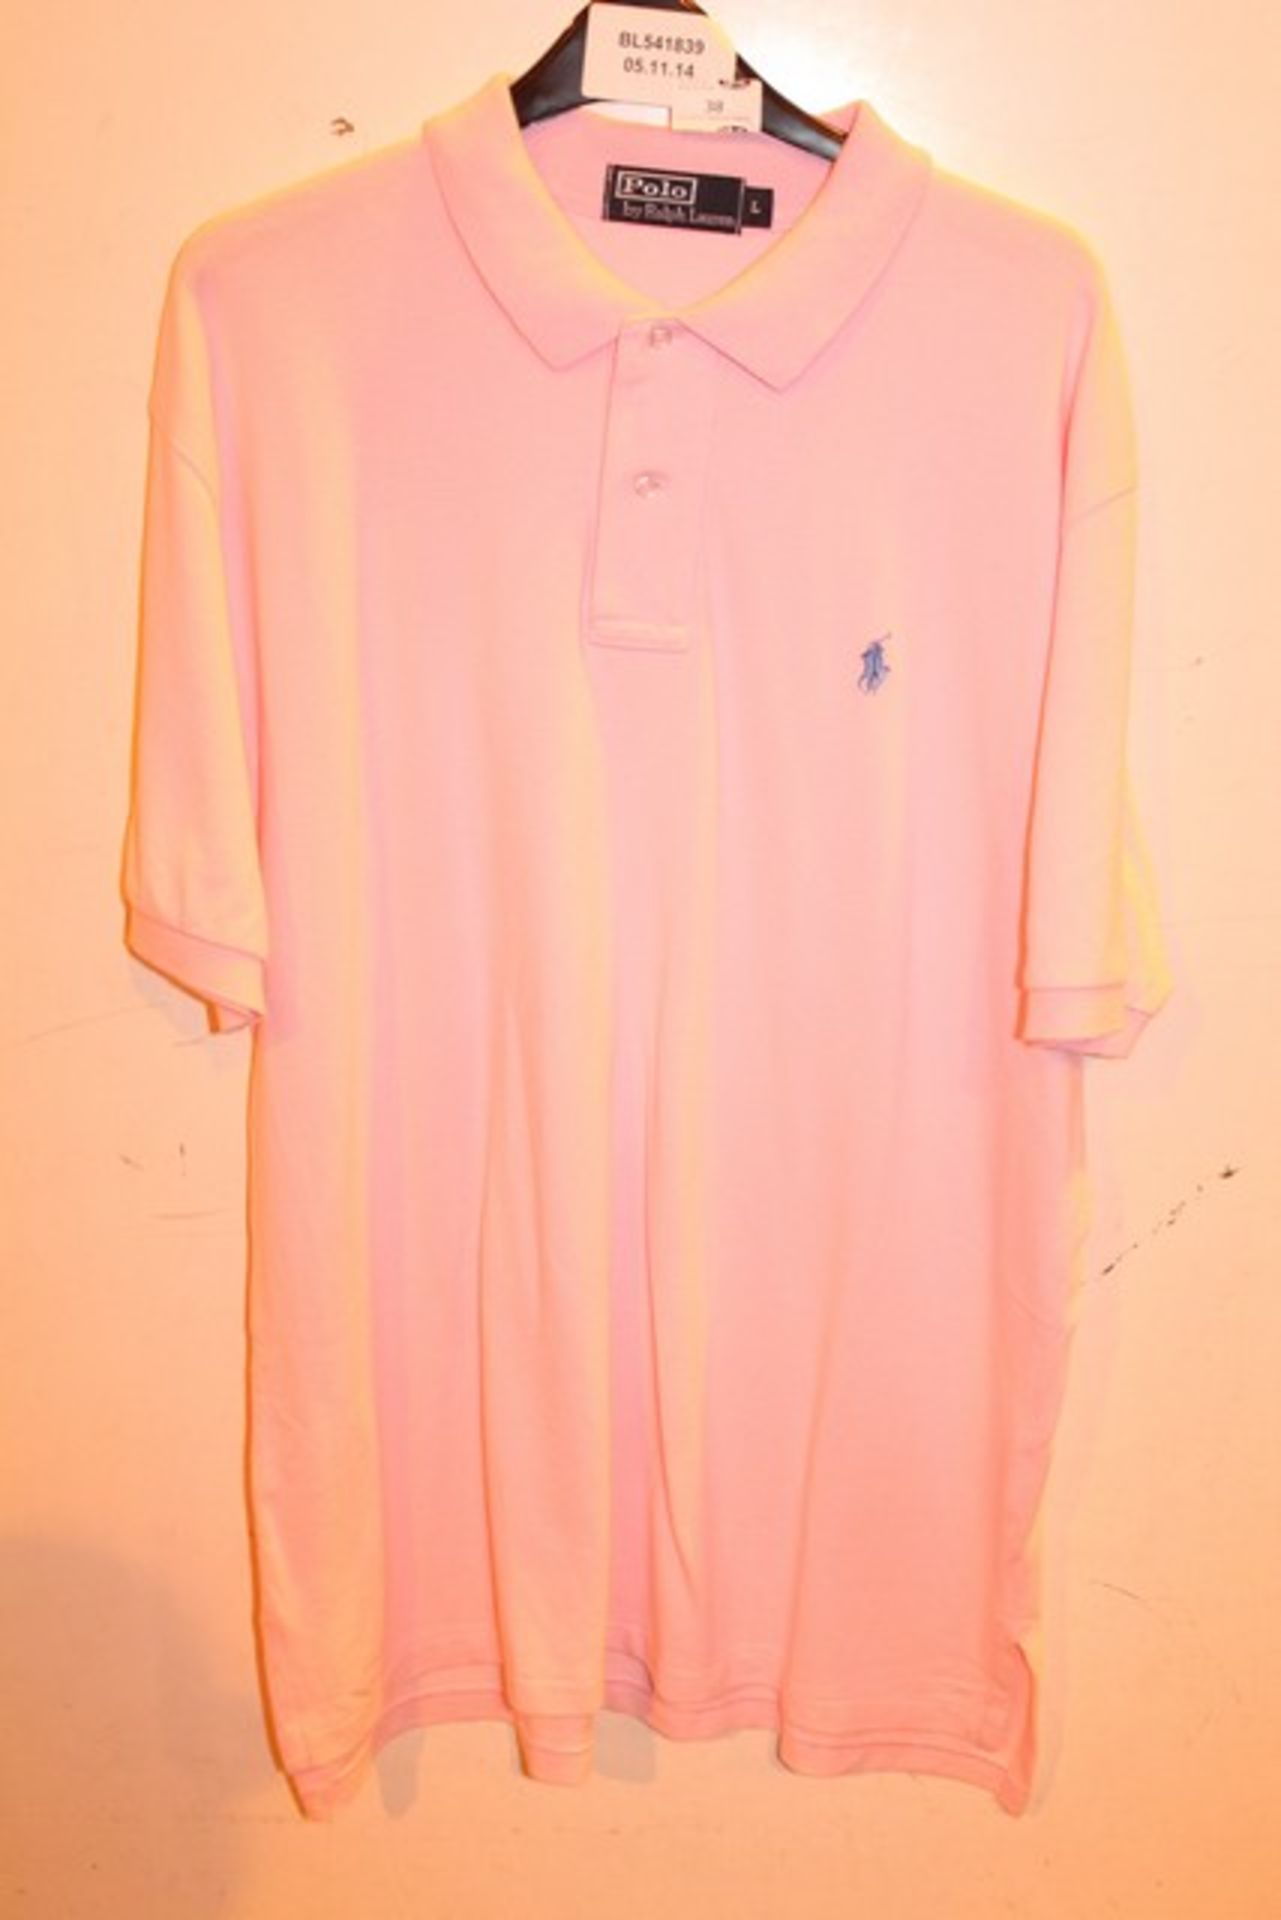 1 x POLO RALPH LAUREN CANDY PINK SIZE LARGE POLO NECK TSHIRT (541839)  *PLEASE NOTE THAT THE BID